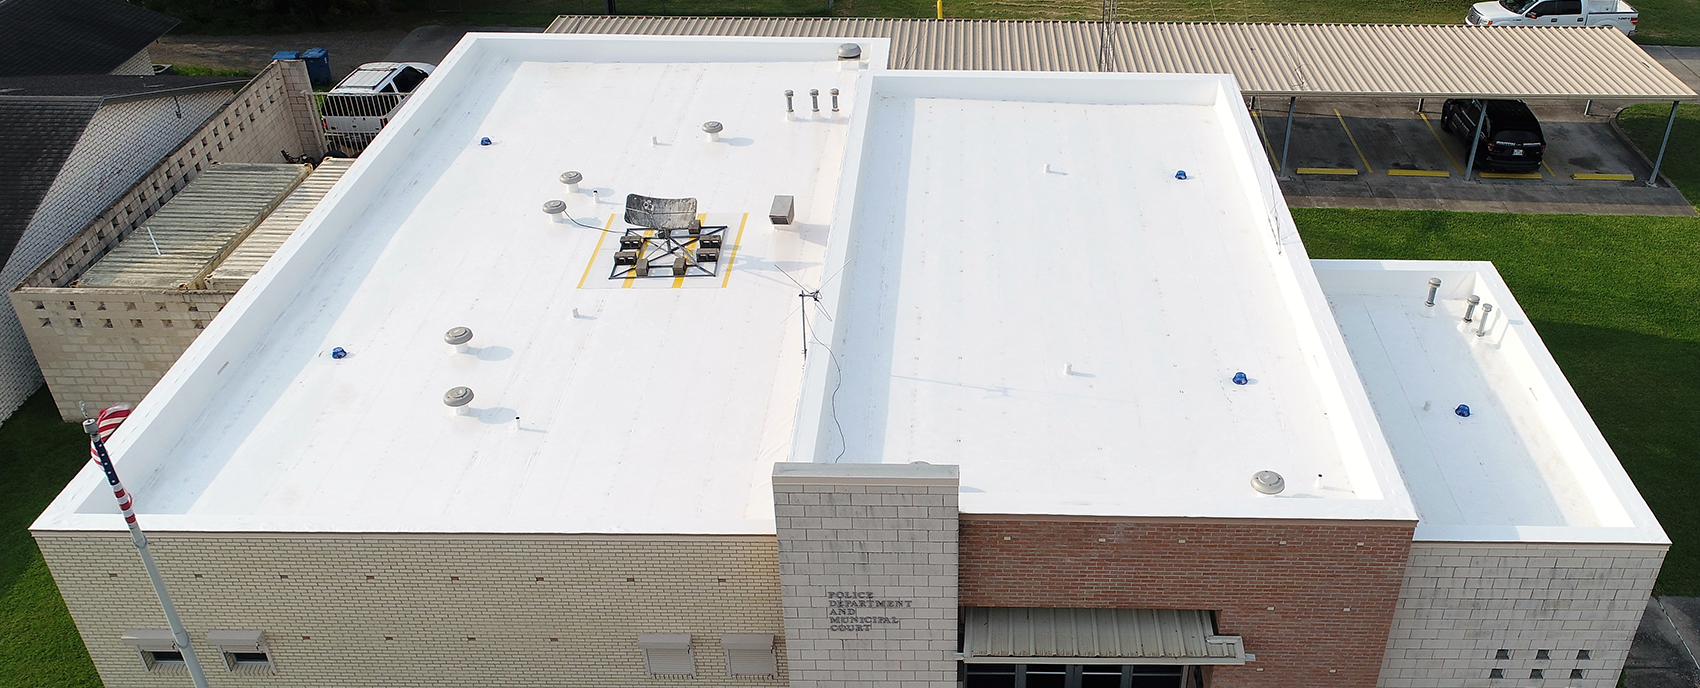 Government Sector roofing, Police Dept. Professional finished roofing